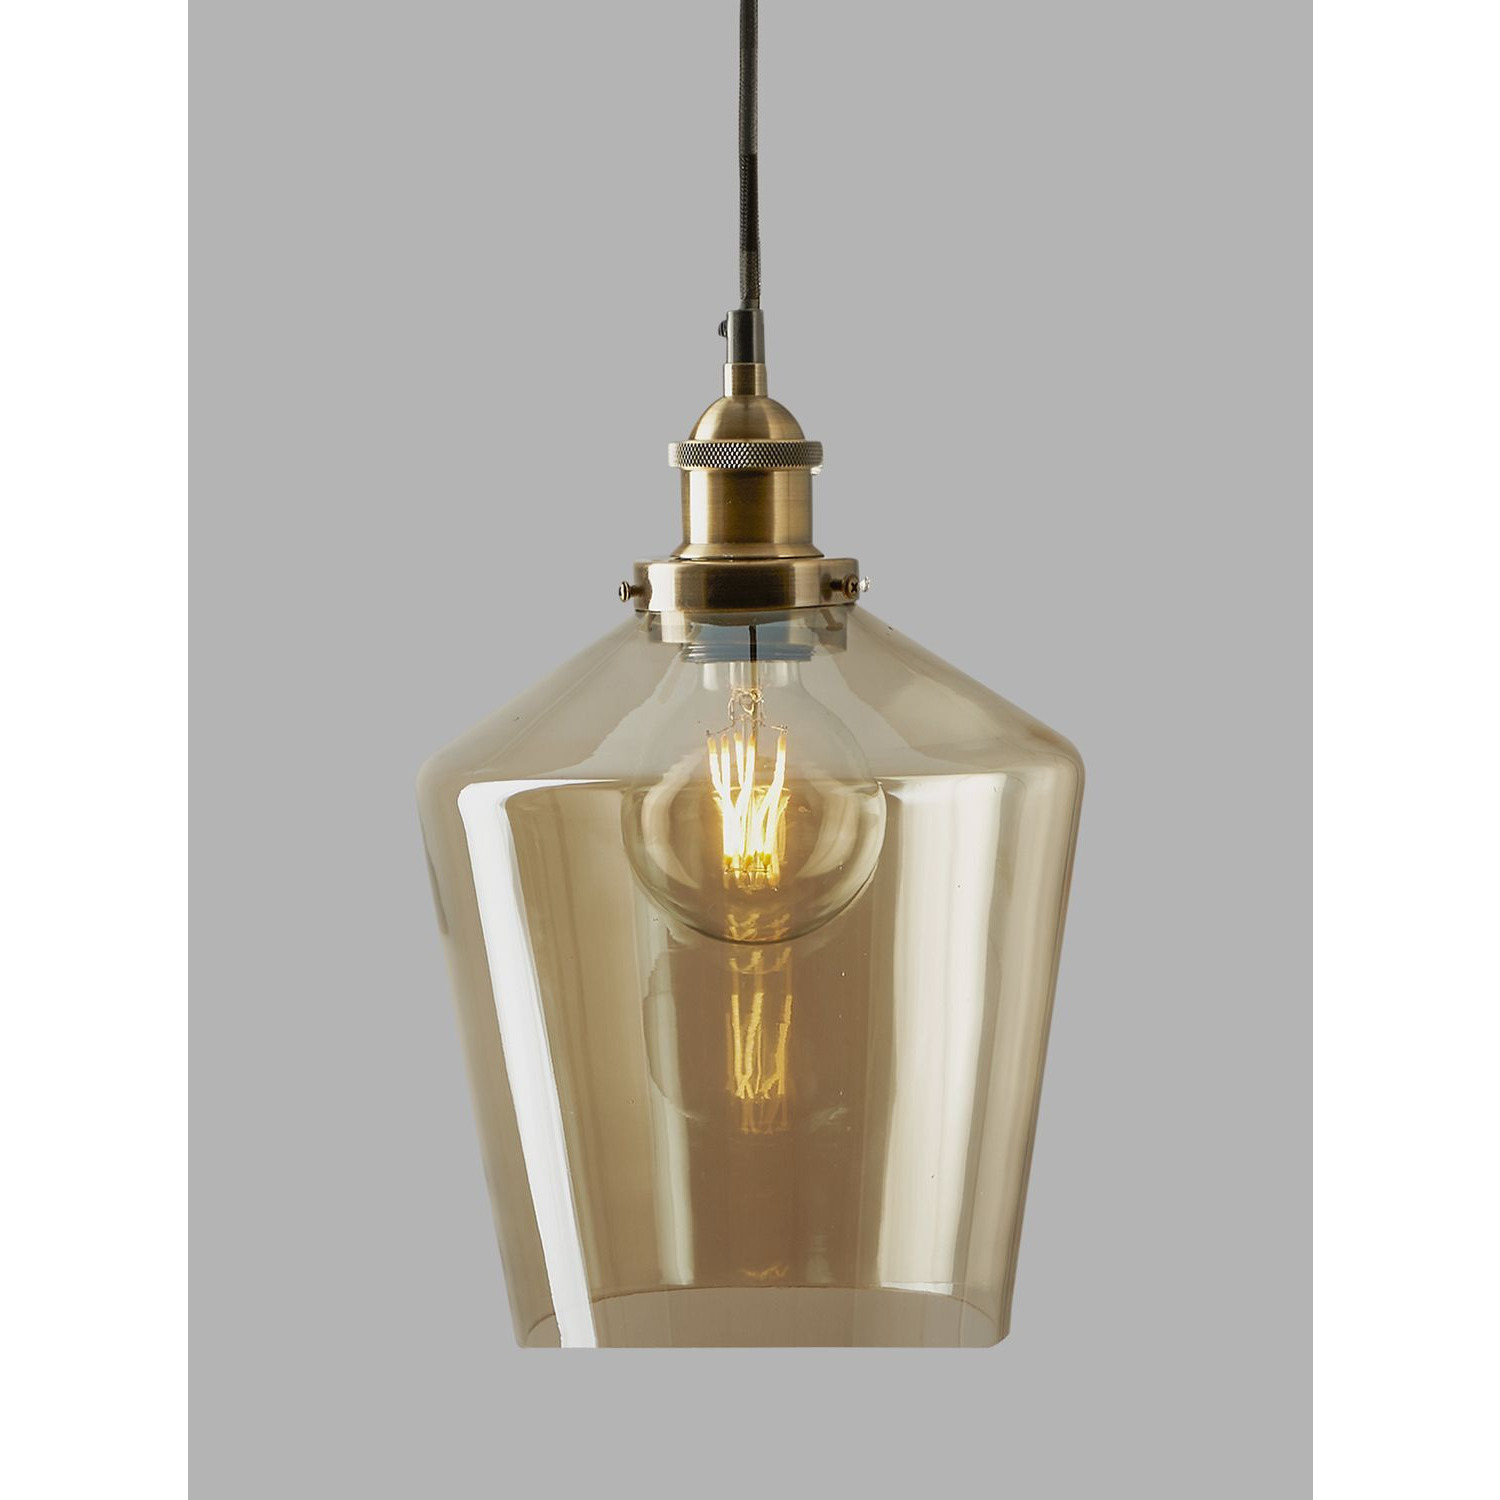 Pacific Lifestyle Glass Pendant Ceiling Light - image 1